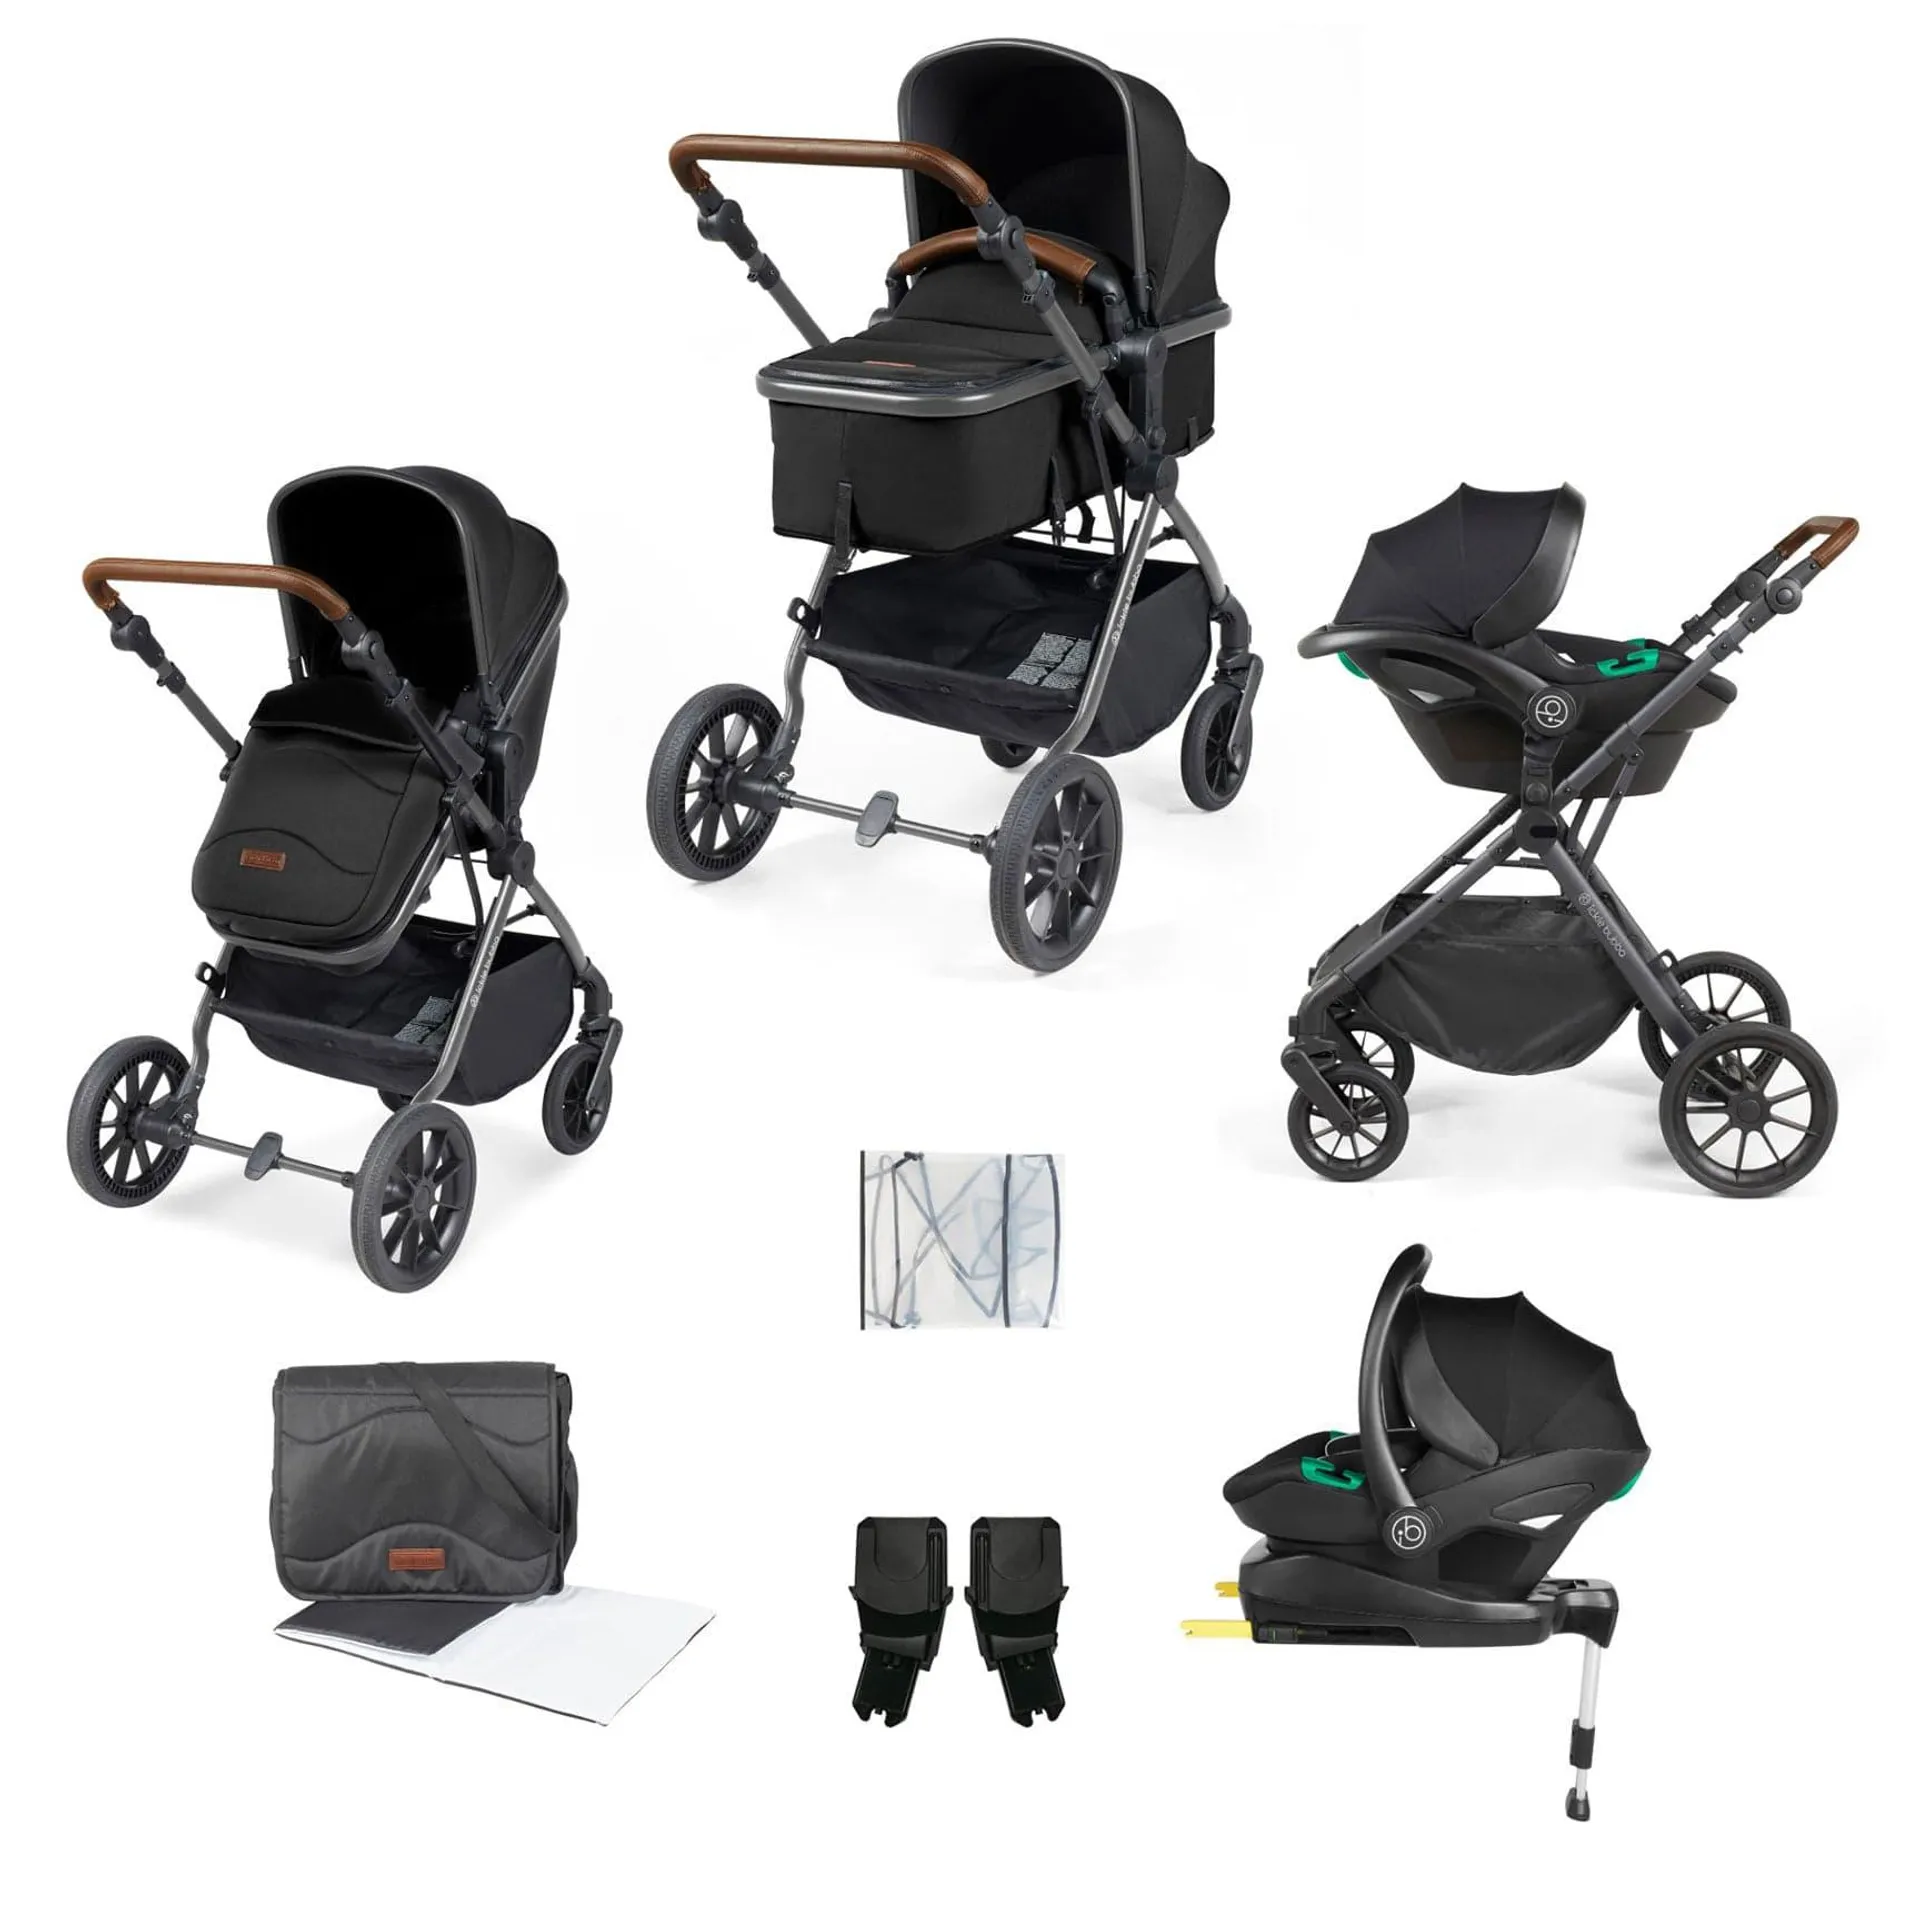 Ickle Bubba Cosmo All-in-One I-Size Travel System with Isofix Base in Black/Gun Metal